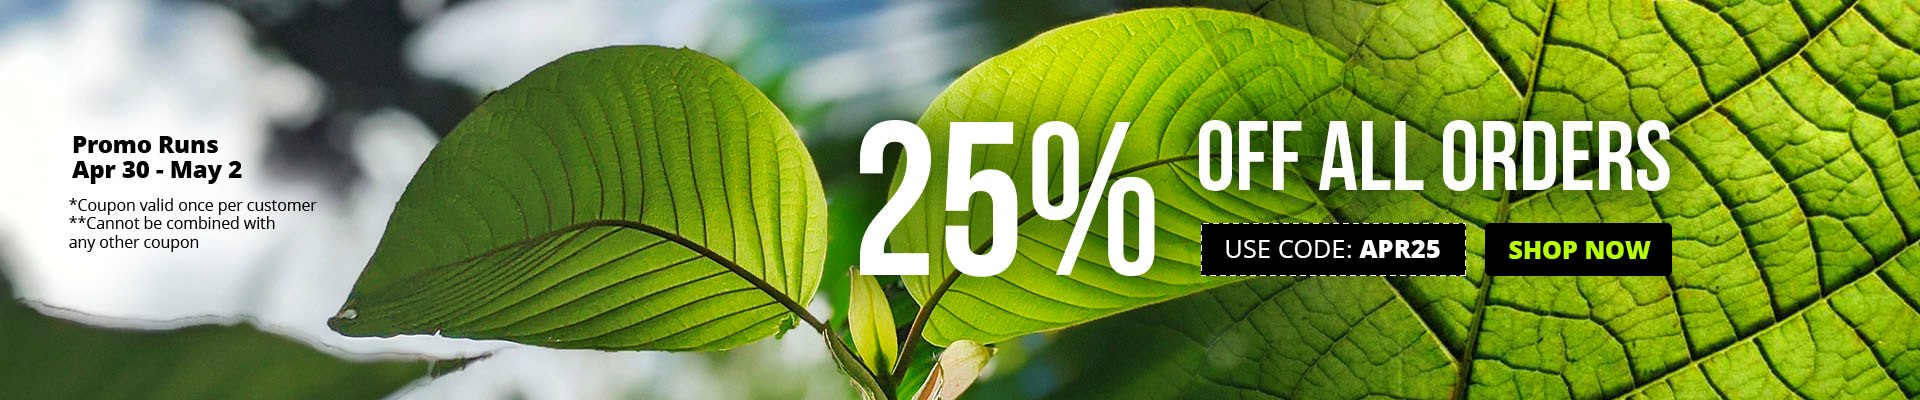 25% off all orders when you buy kratom at Kratora. Use code APR25 at checkout